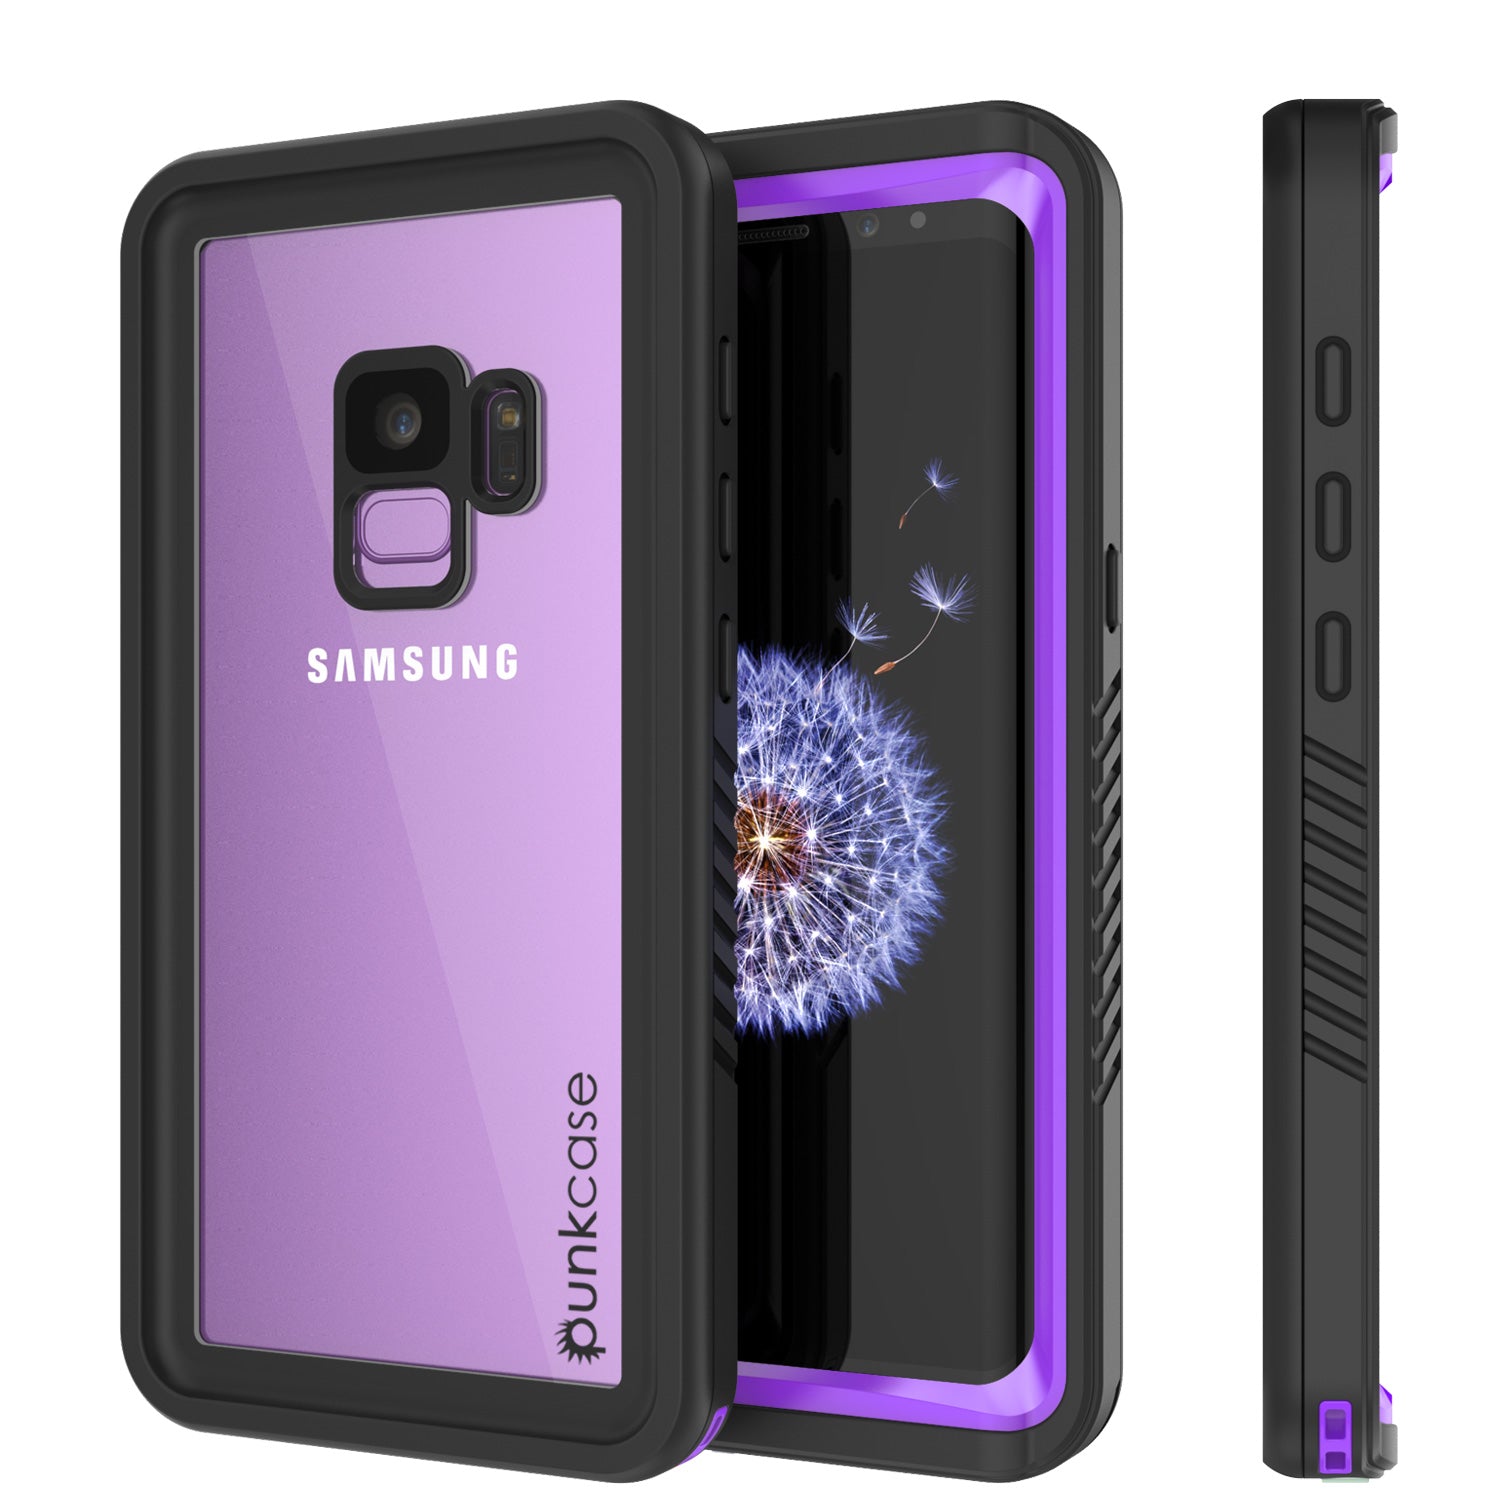 Galaxy S9 PLUS Waterproof Case, Punkcase [Extreme Series] [Slim Fit] [IP68 Certified] [Shockproof] [Snowproof] [Dirproof] Armor Cover W/ Built In Screen Protector for Samsung Galaxy S9+ [Purple]